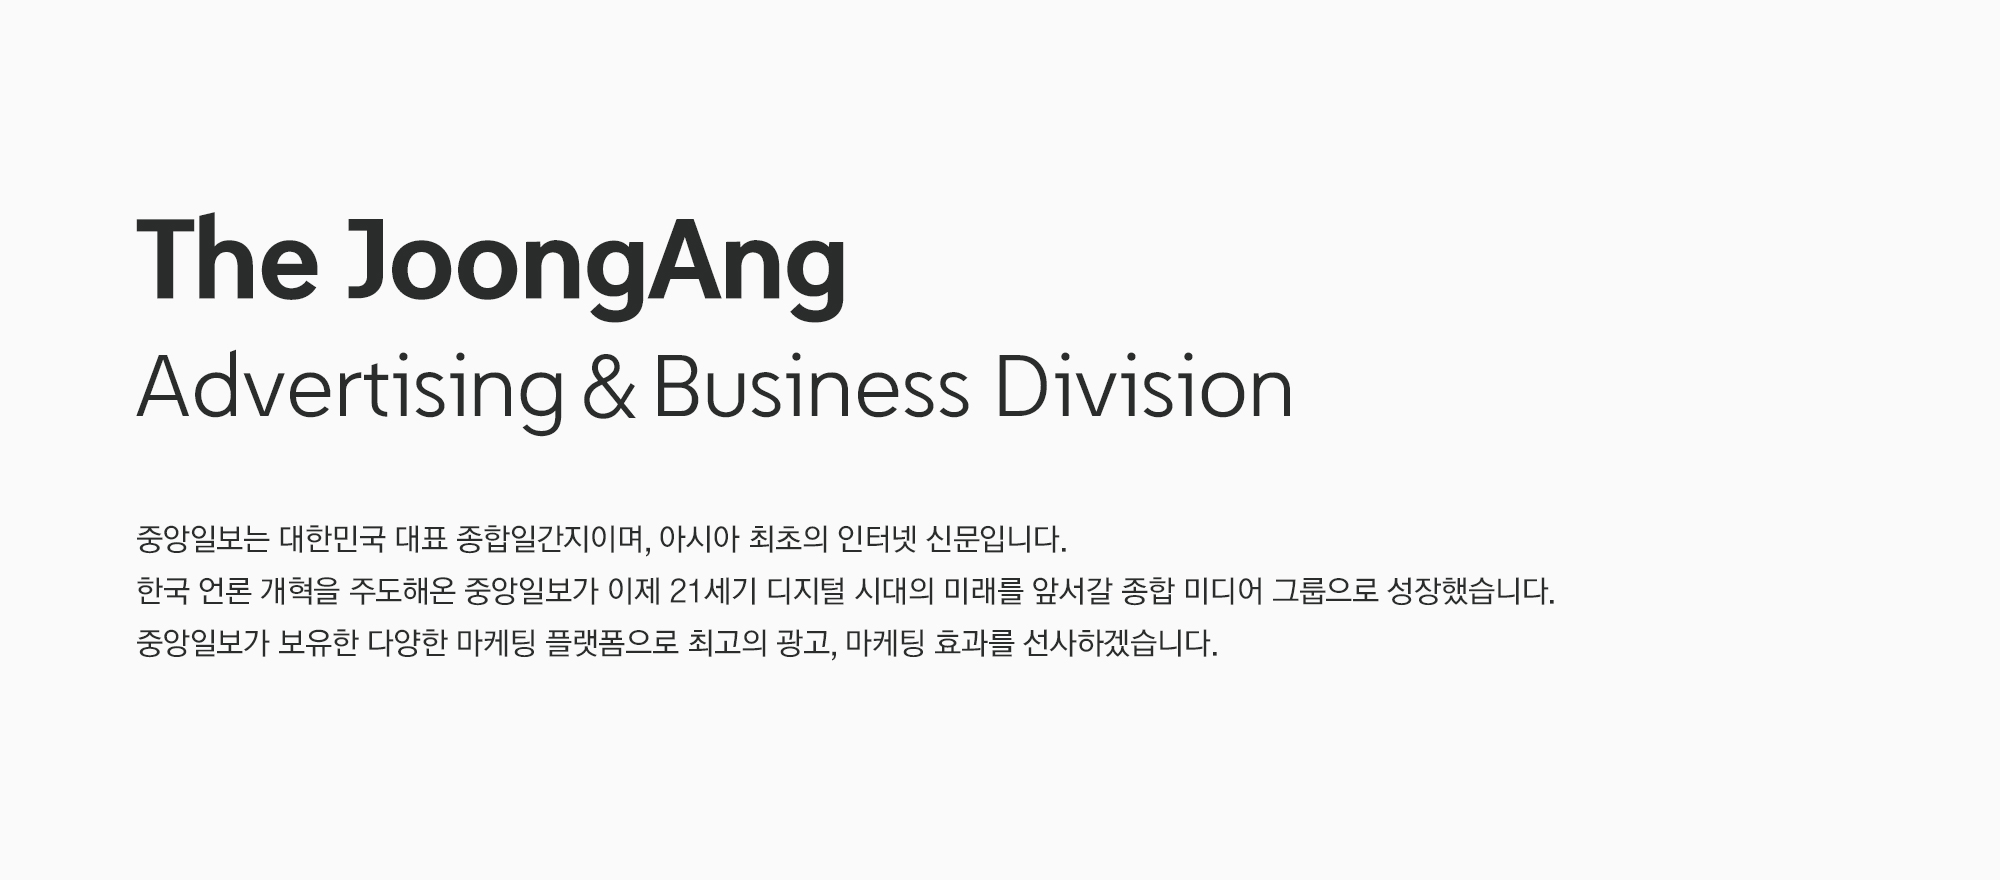 Advertising & Business Division